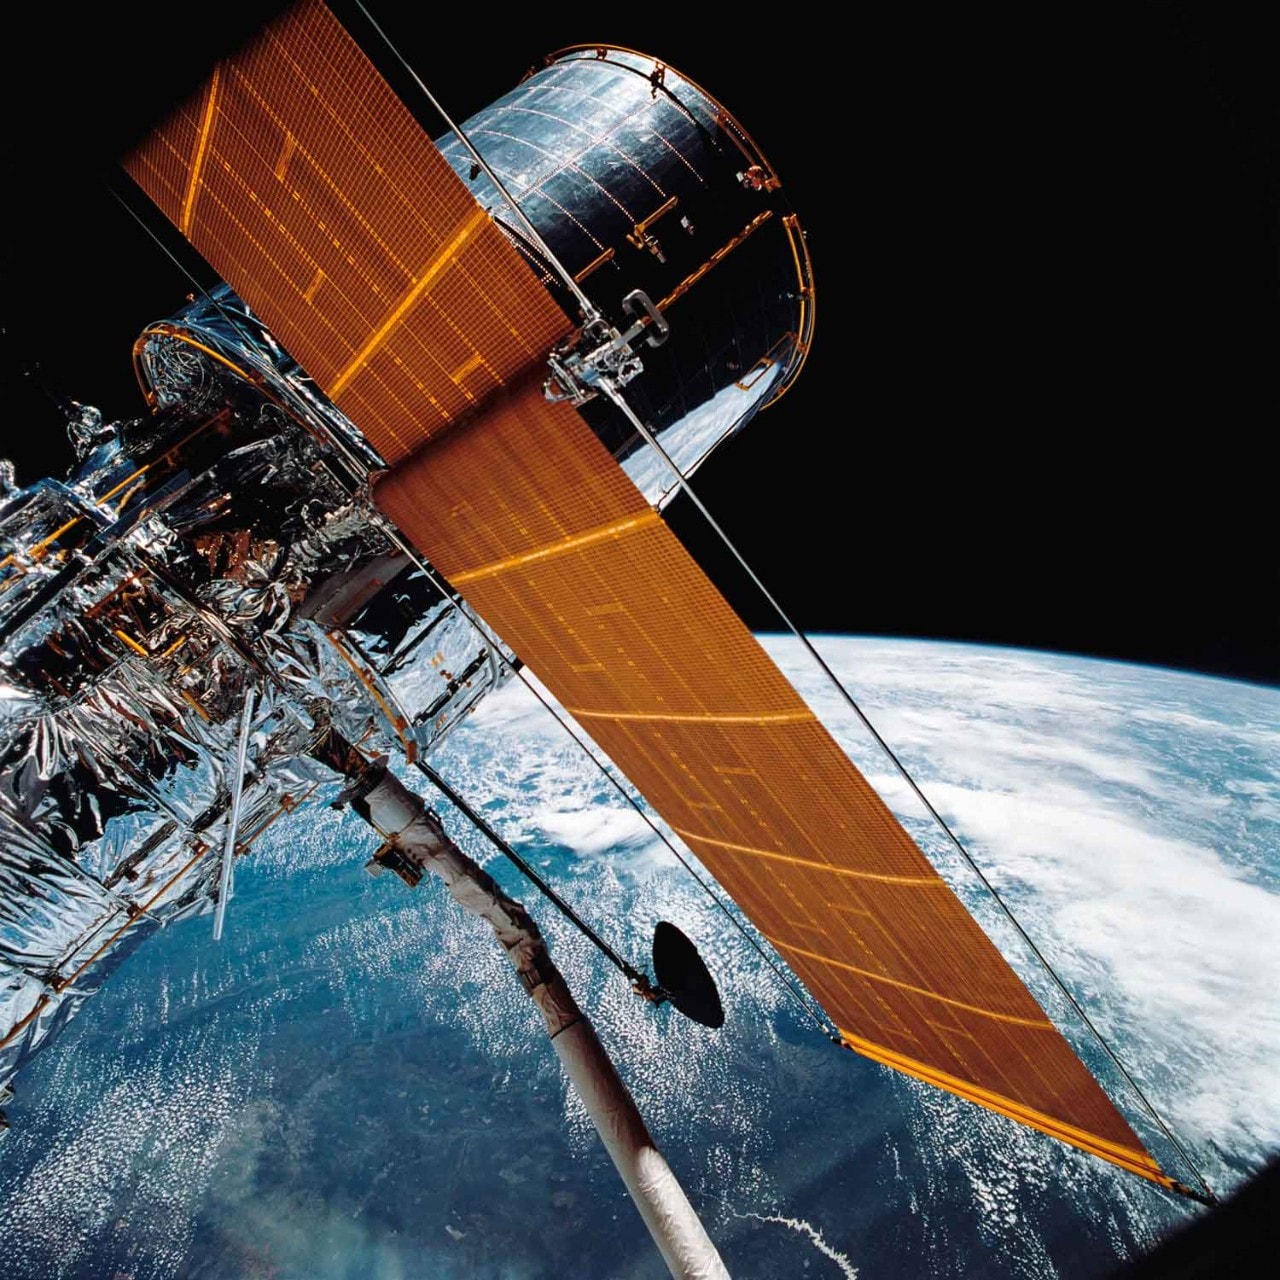 Close-up image of a satellite above the earth